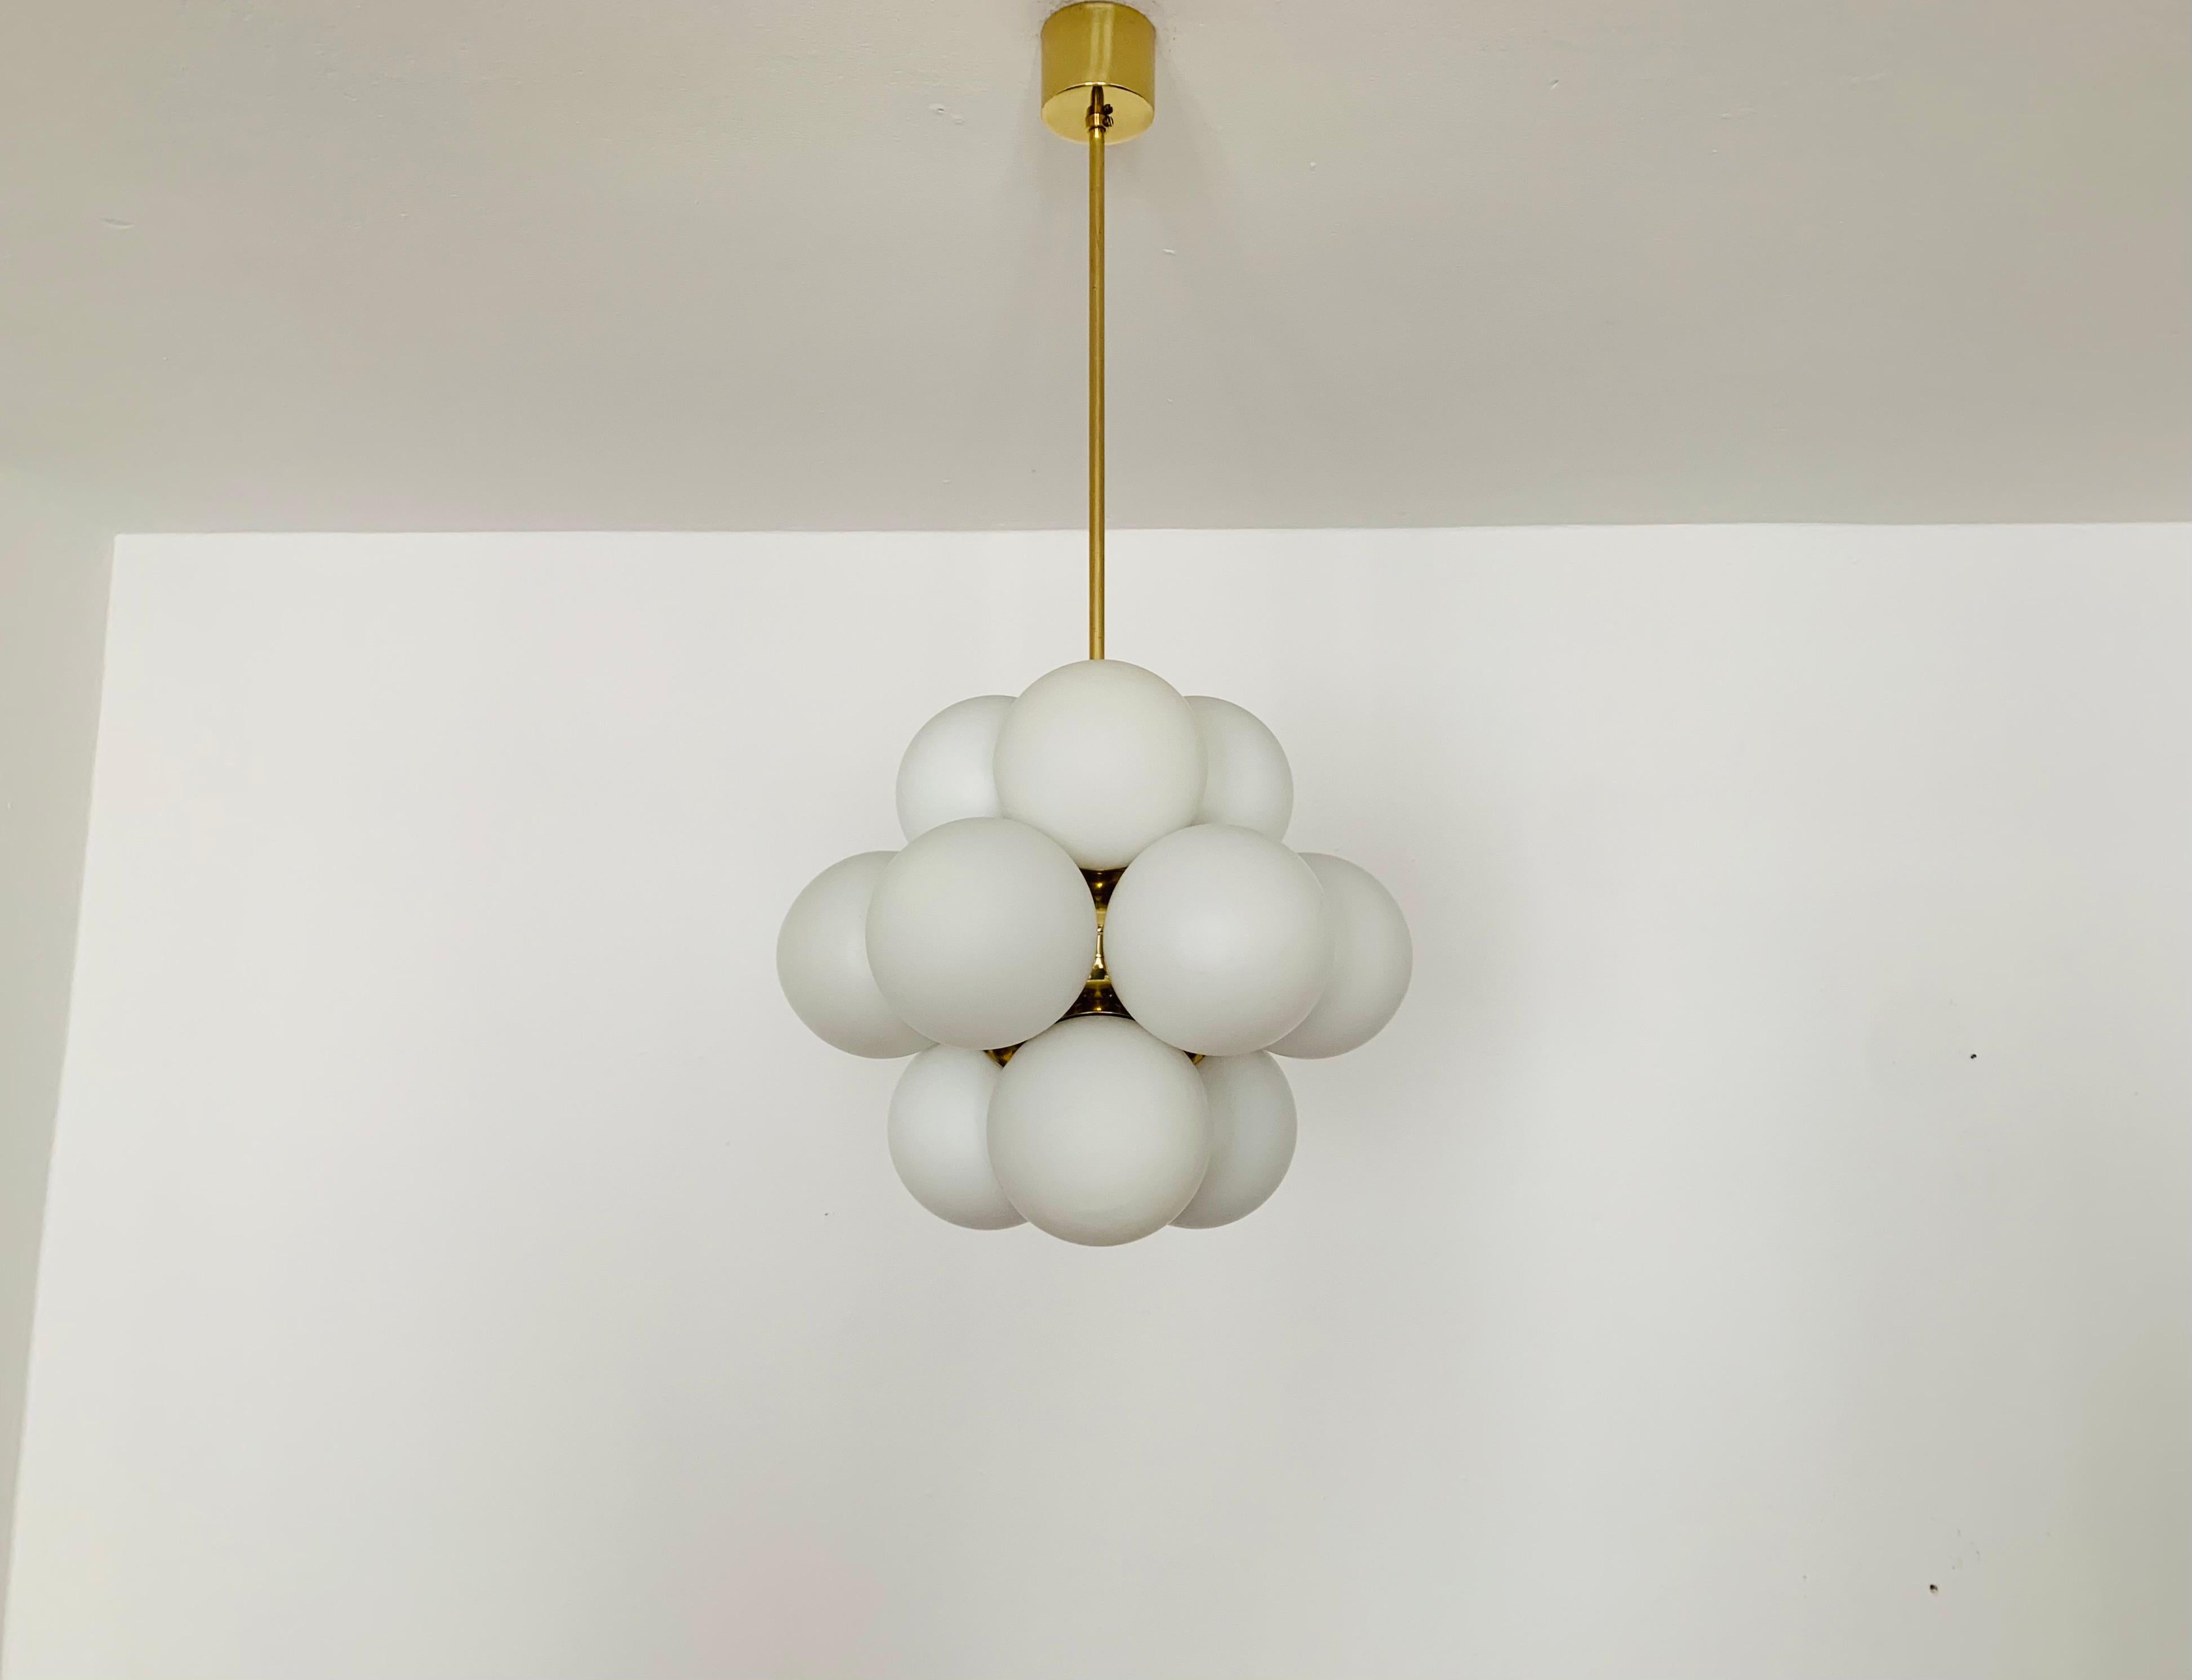 Extremely beautiful Sputnik chandelier from the 1960s.
The 12 opal glass lampshades spread a pleasant light.
The lamp has a very high quality finish.
Very contemporary design with a fantastic look.

Manufacturer: Kaiser Leuchten/ Kaiser